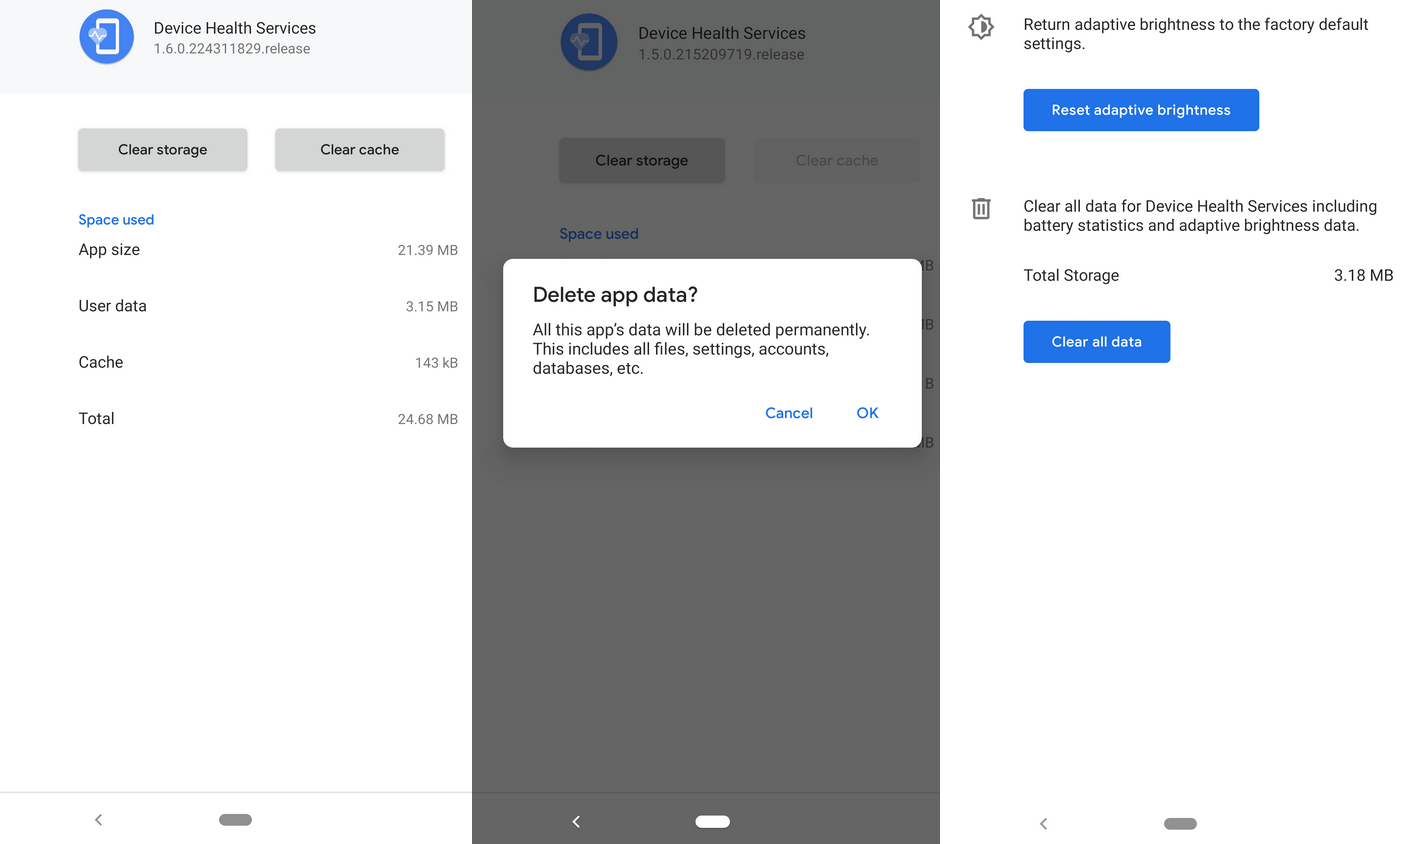 Version 1.6 of the Digital Health Services app will allow you to reset Adaptive Brightness without wiping your battery data - Android 9 Pie users can now reset Adaptive Brightness without losing their battery data